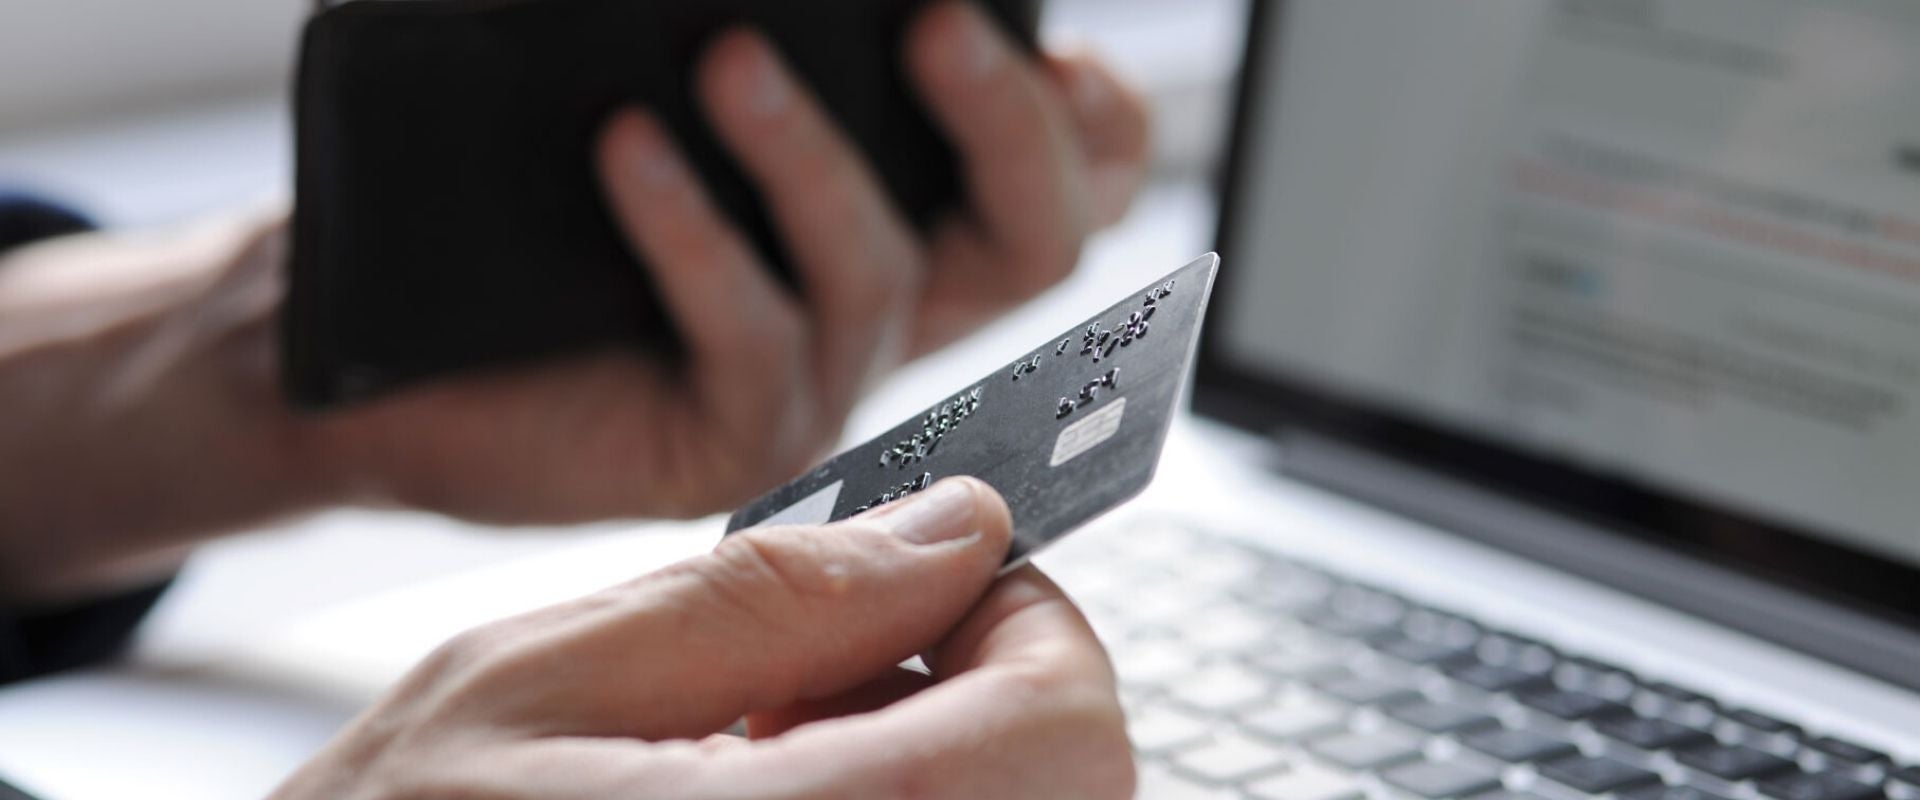 image of man using credit card to make purchase